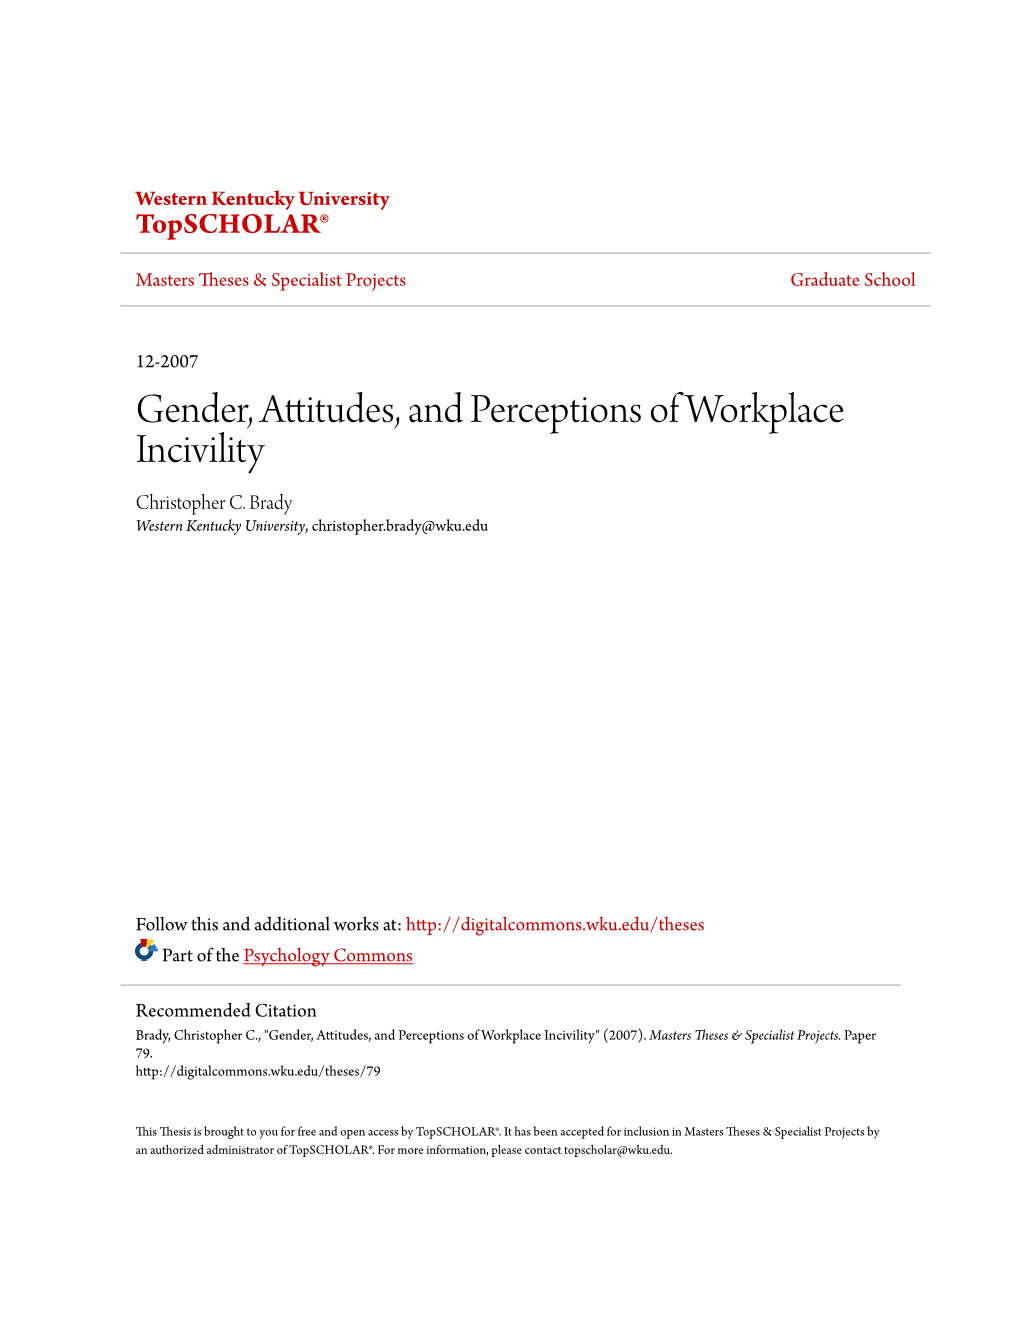 Gender, Attitudes, and Perceptions of Workplace Incivility Christopher C